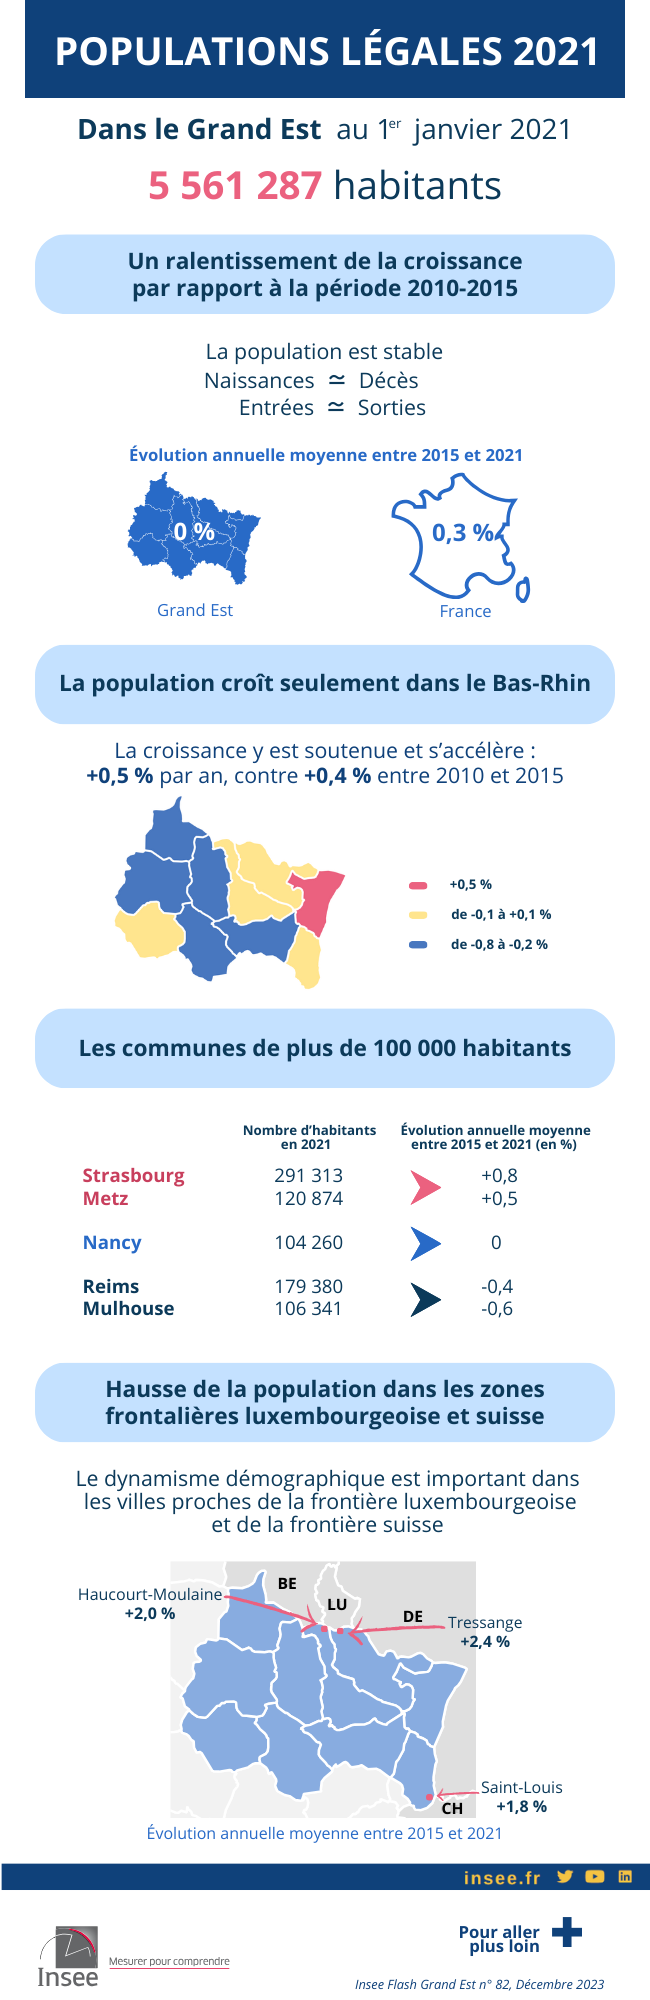 ac inf 82 infographie insee populationslegales (2)